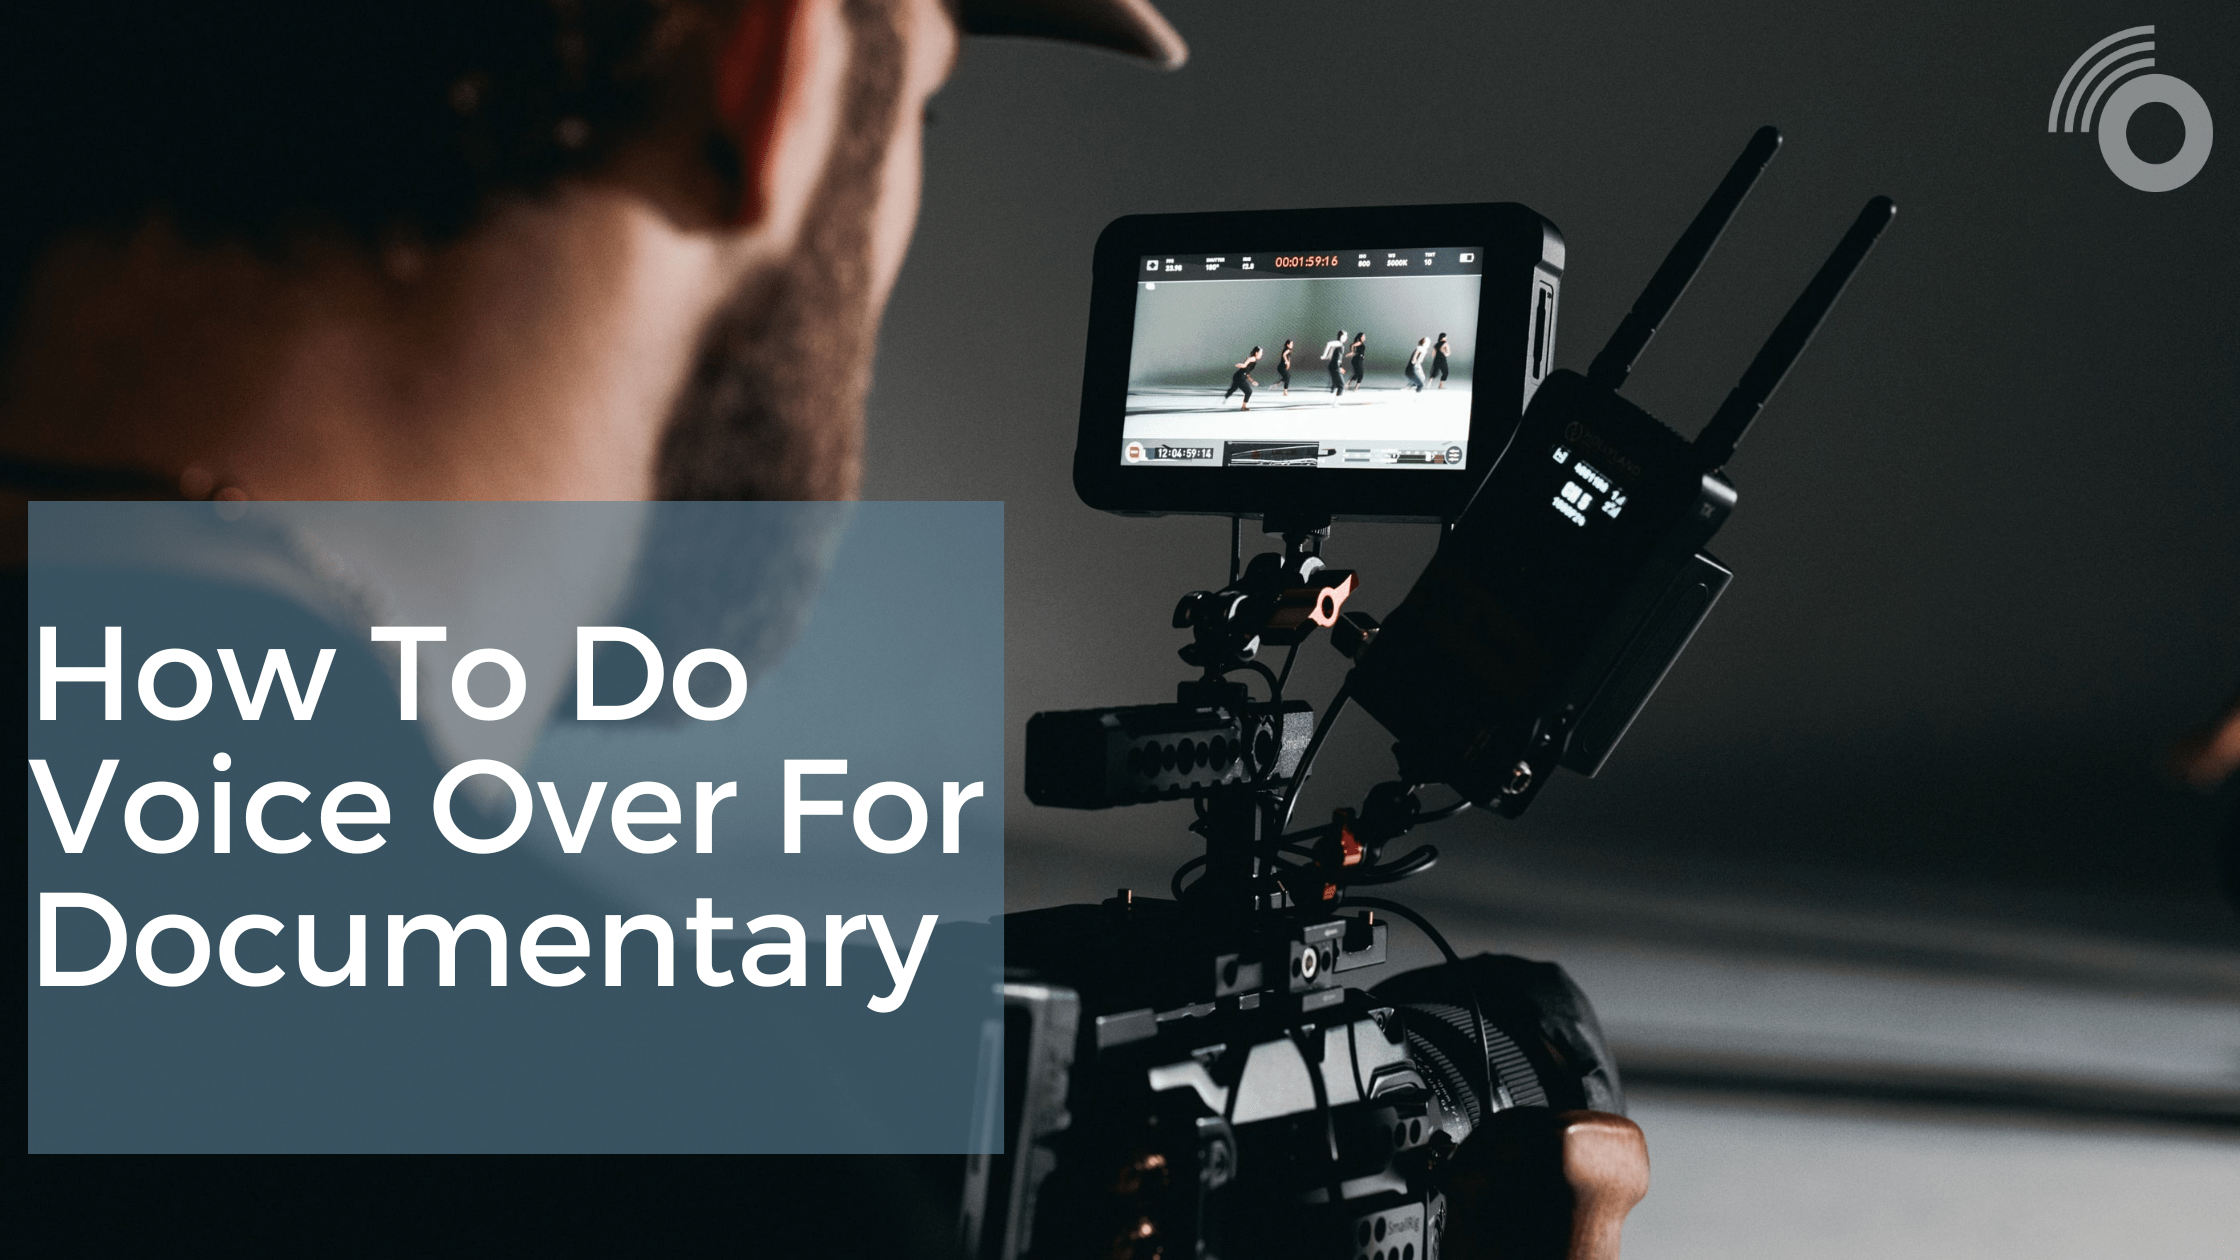 How to Do Voice Over For Documentary